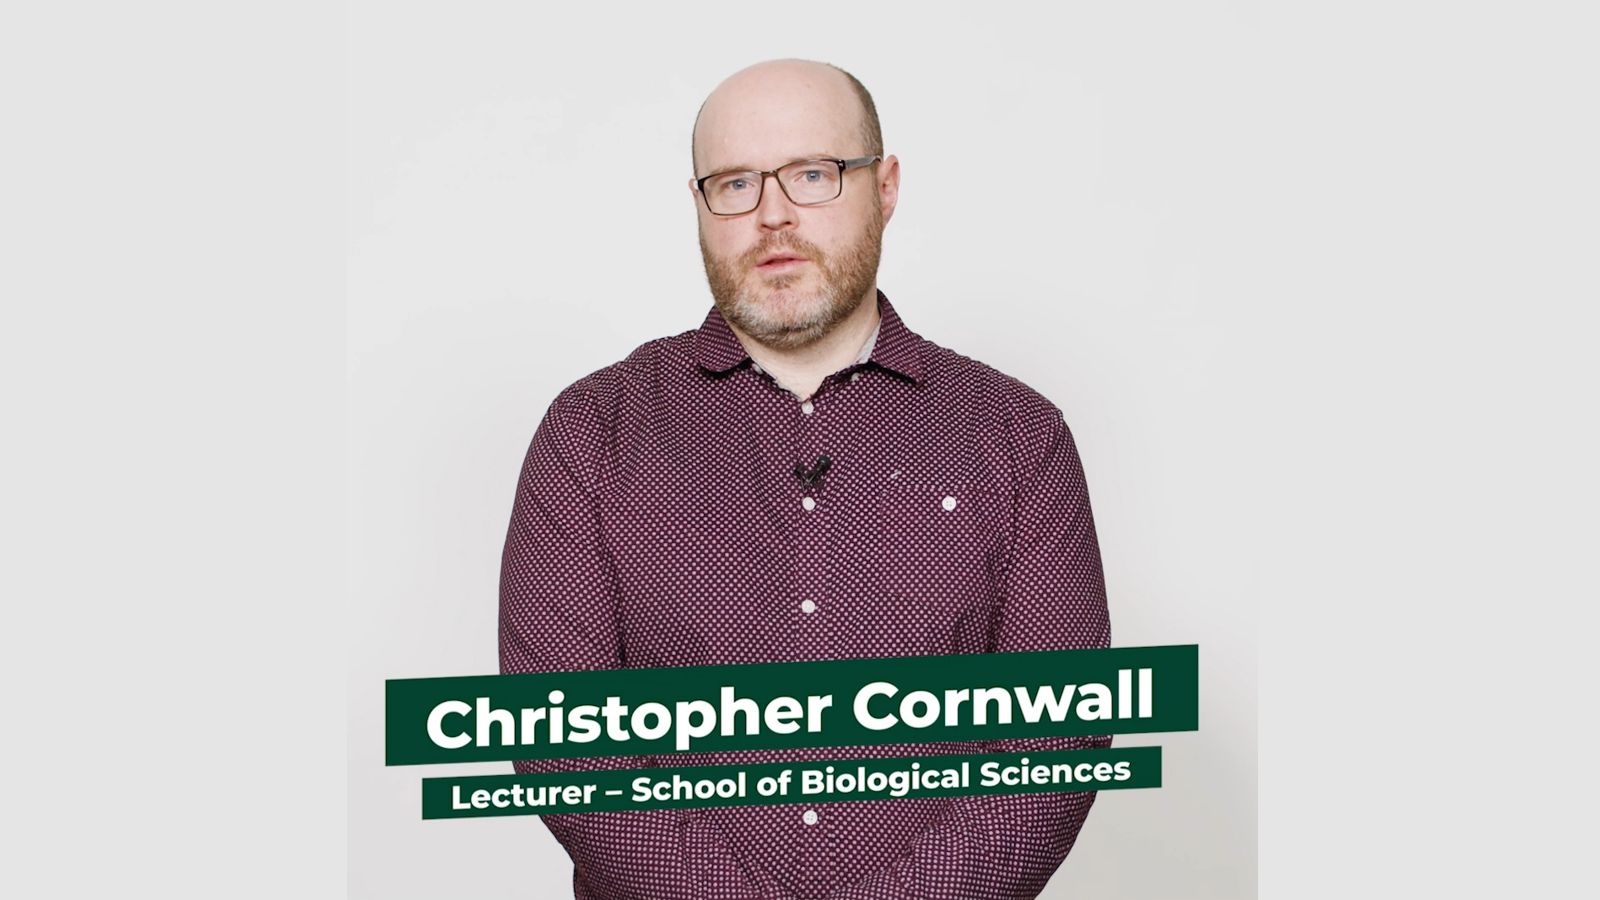 Lecturer Christopher Cornwall stands facing the camera against a white background